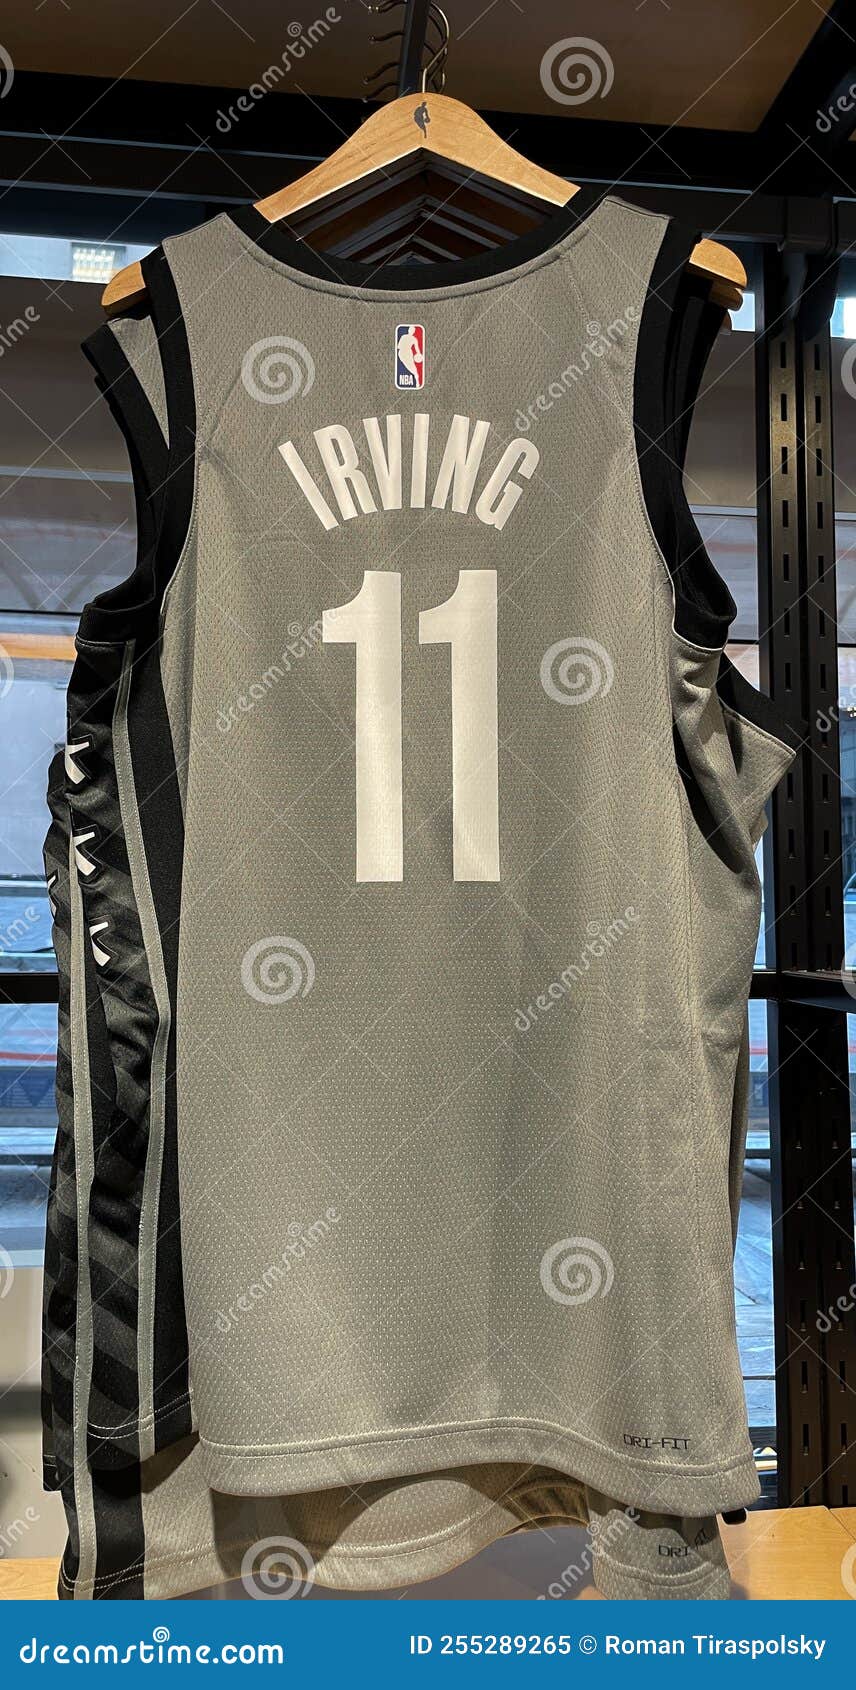 jersey kyrie irving